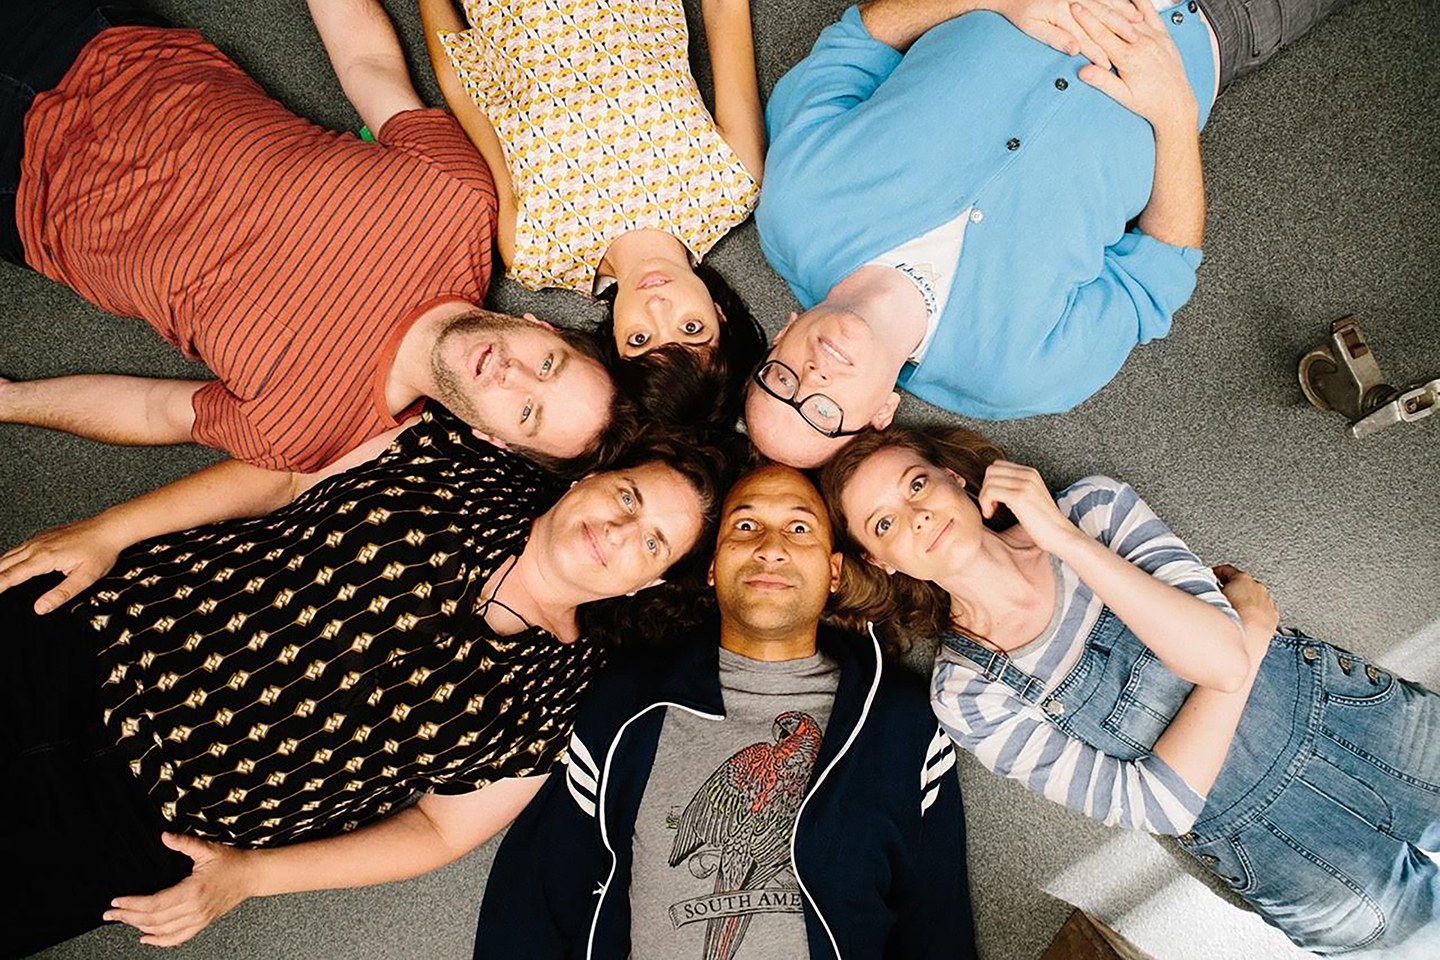 Watch: Keegan-Michael Key, Gillian Jacobs, And Mike Birbiglia In First Trailer For 'Don't Think Twice'